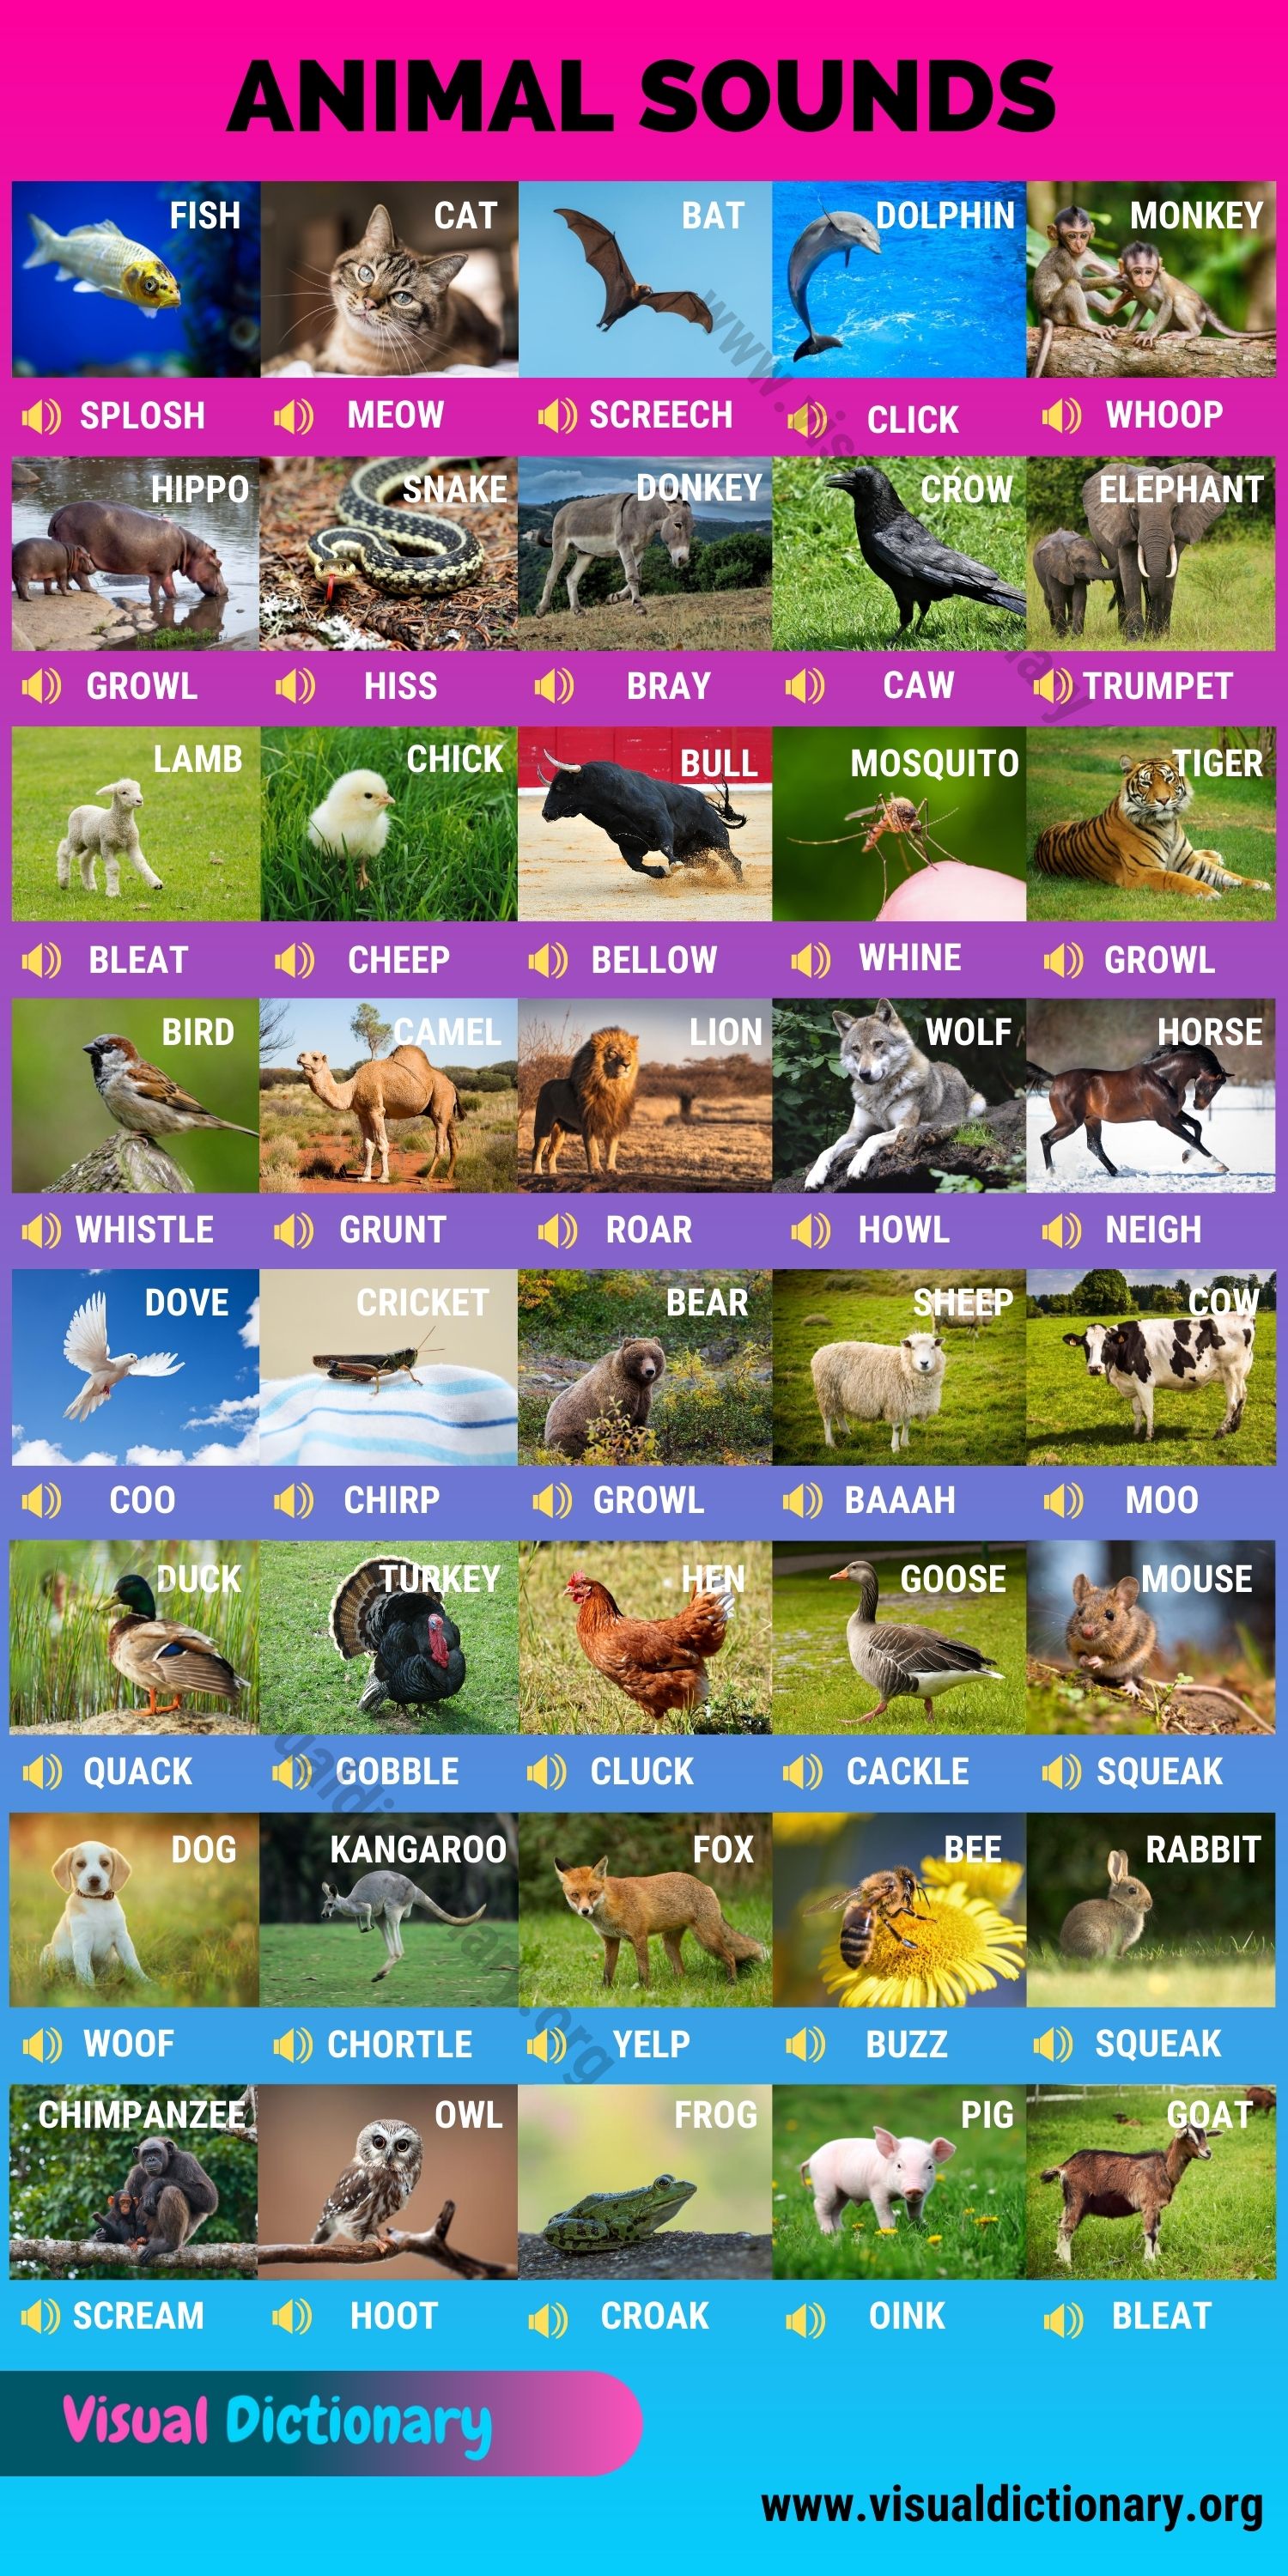 Animal Sounds: 40 Fun Animal Sounds in English - Visual Dictionary